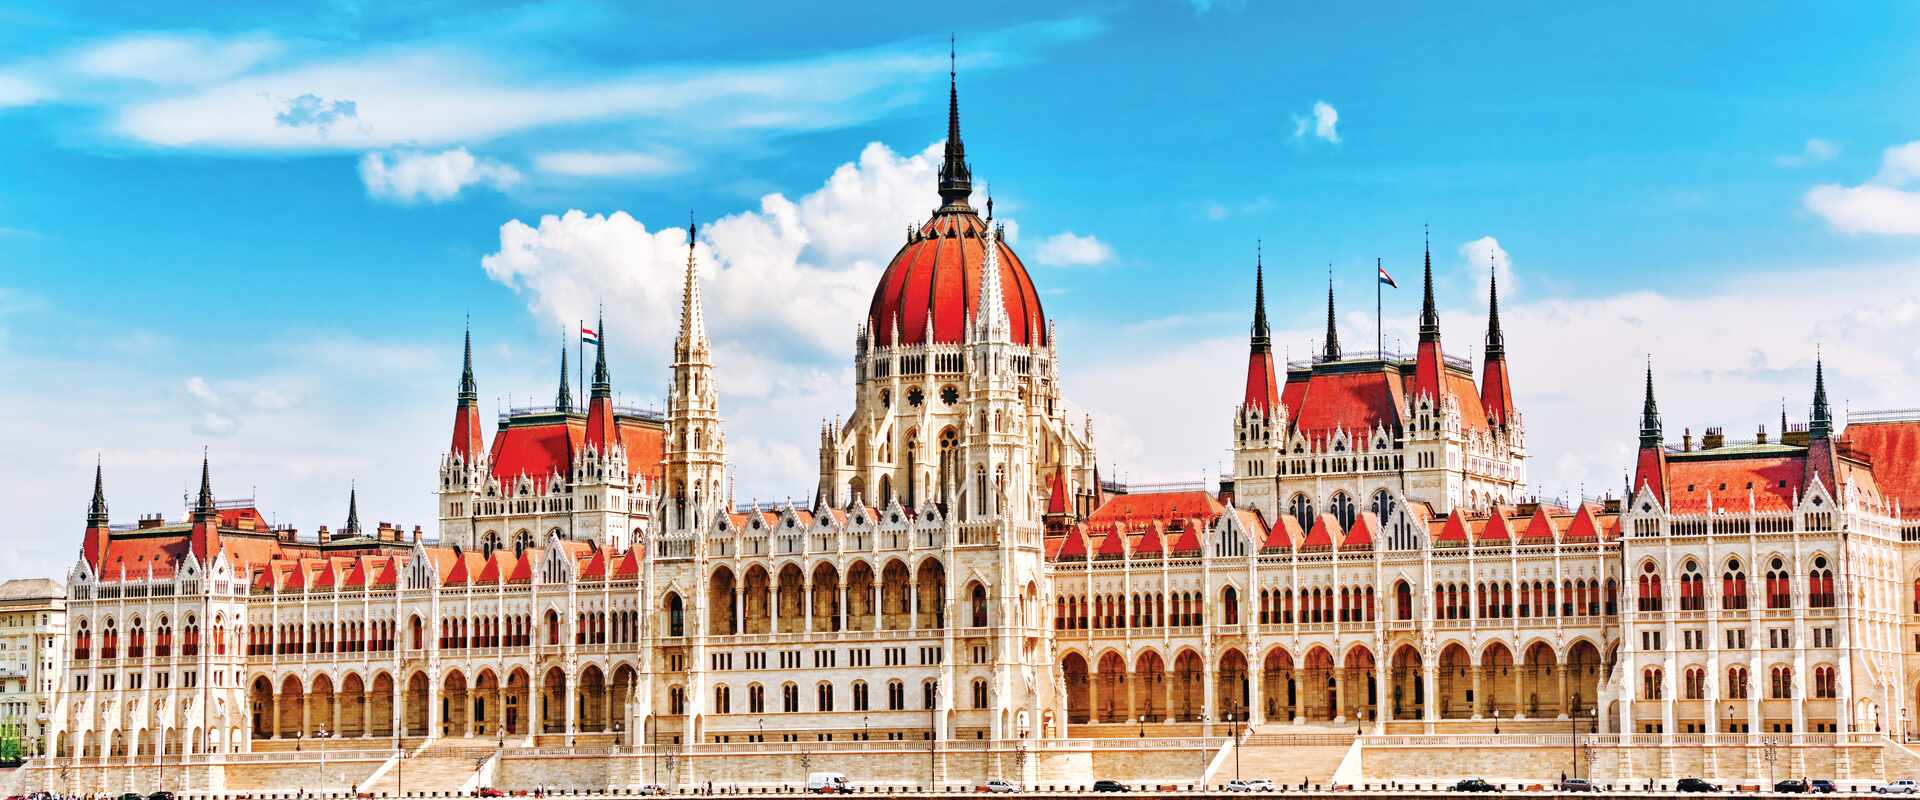 The hungarian parliament building in Budapest (Orszaghaz)